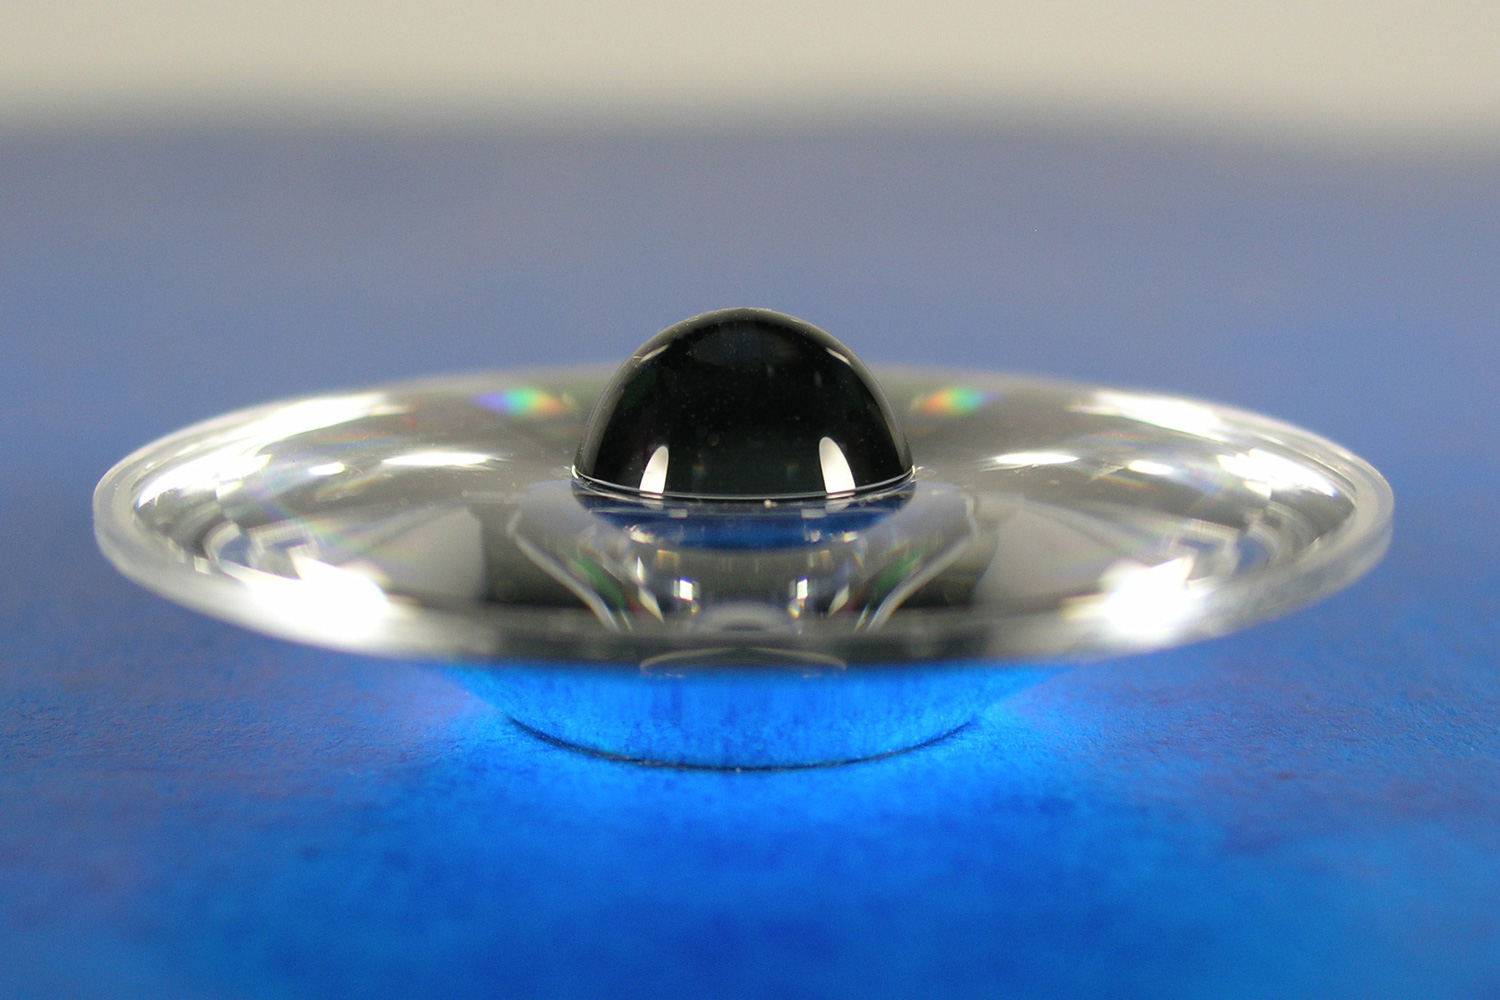 Diamond-turned concentrator reminiscent of the shape of Saturn and its rings.